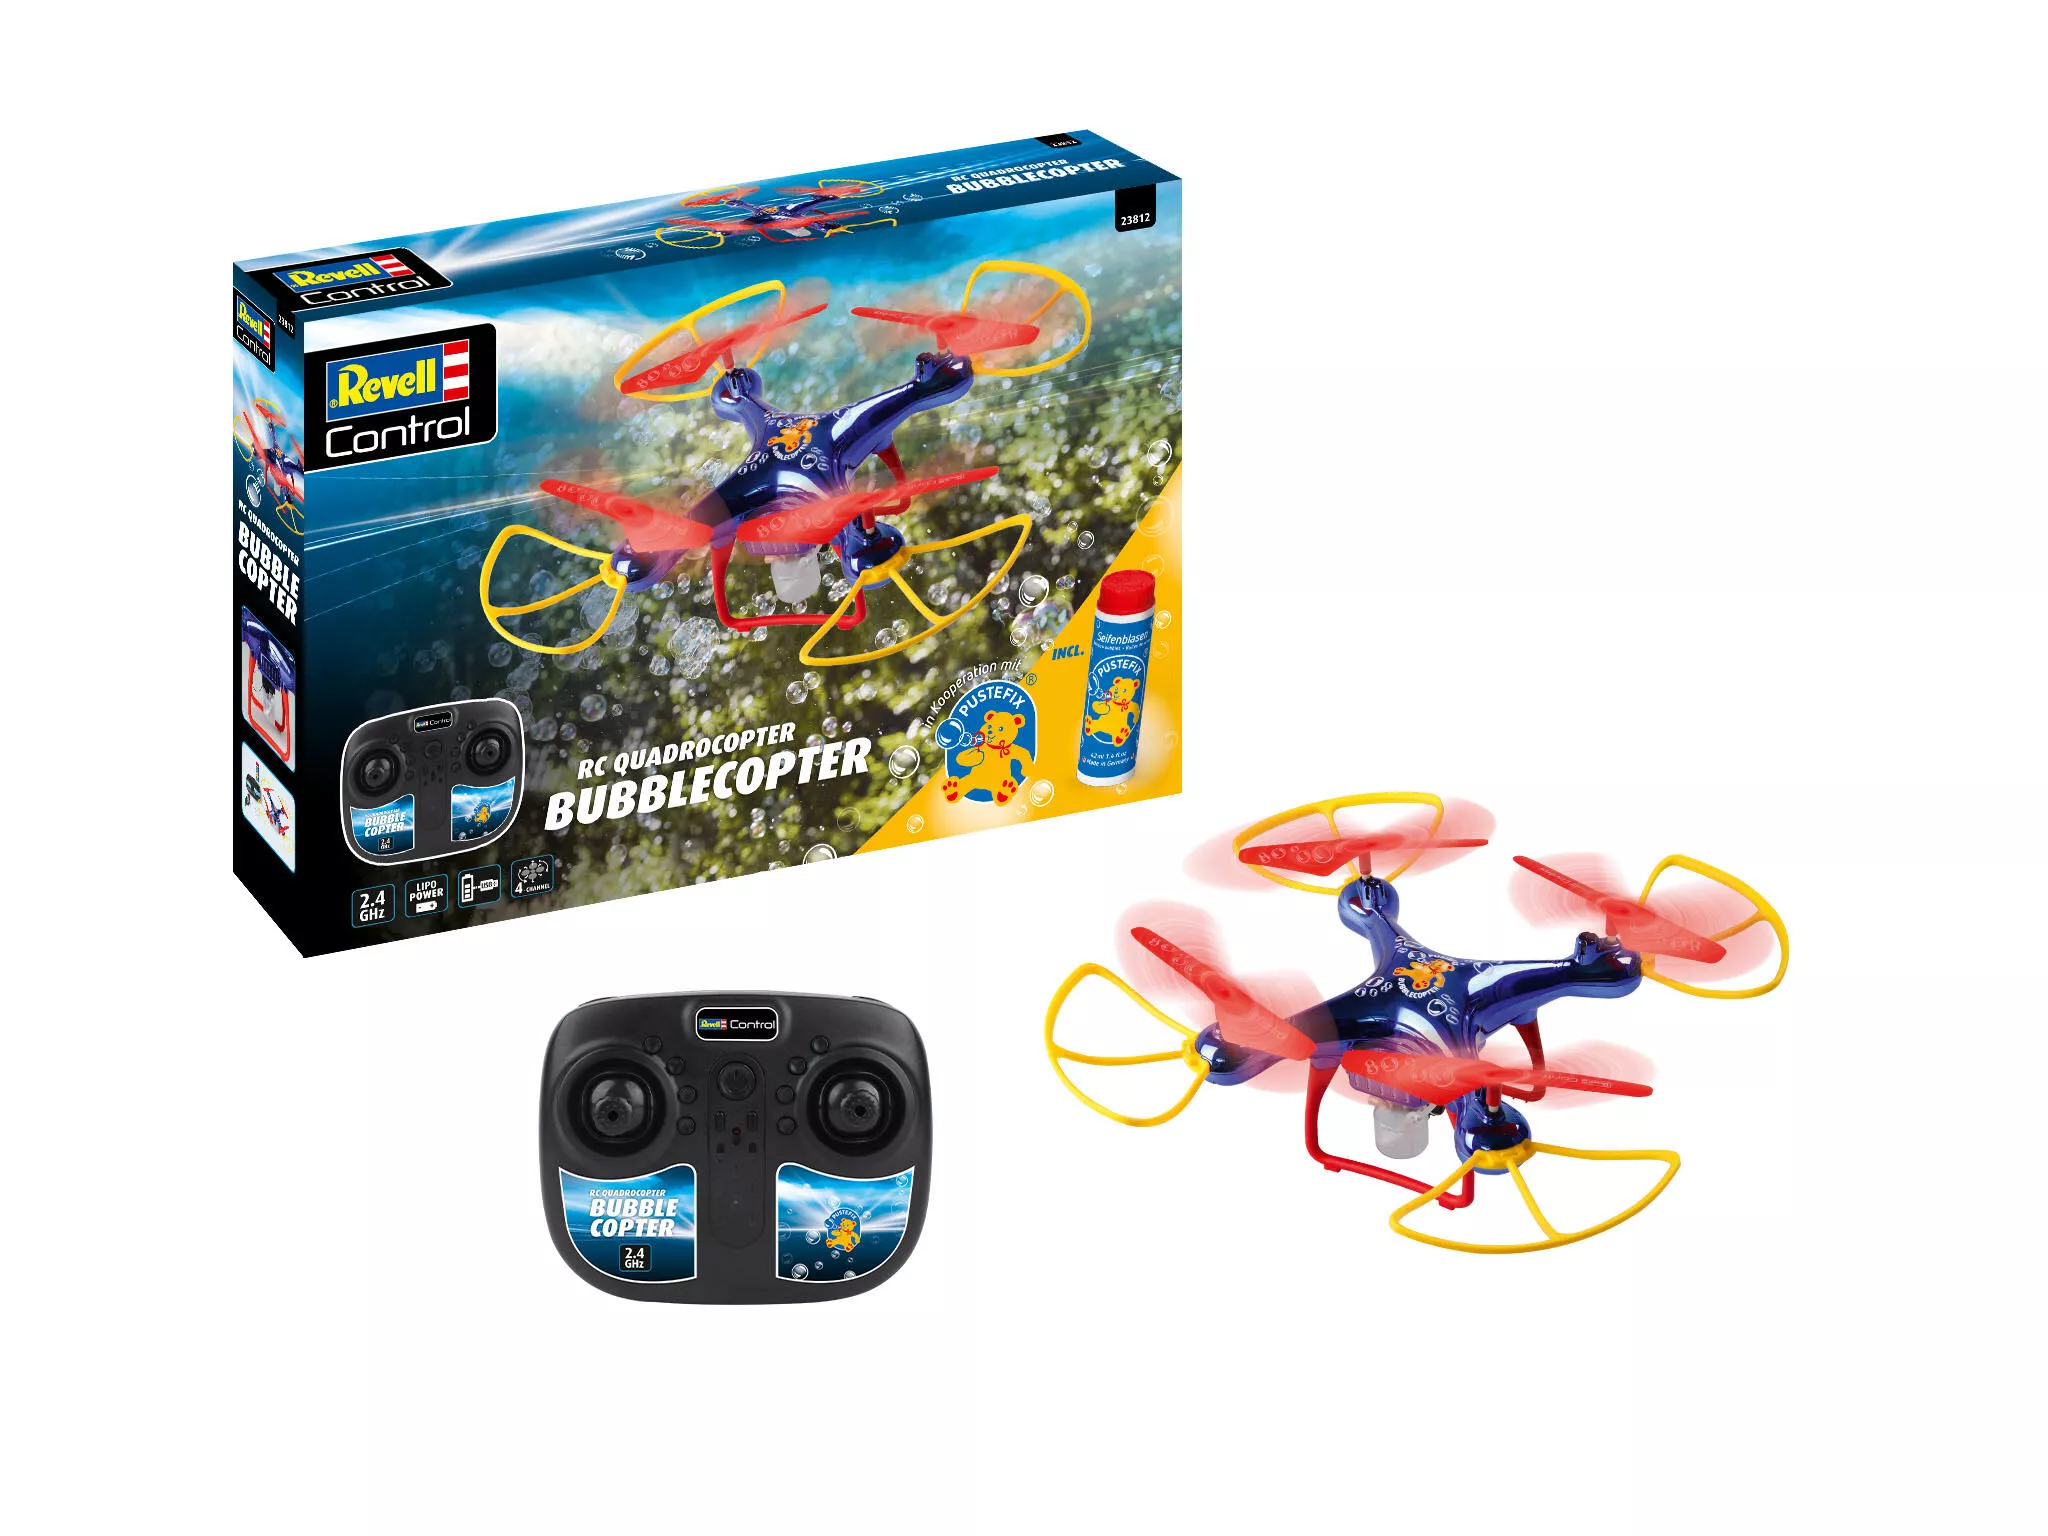 Revell 23812 RC Quadrocopter "Bubblecopter" Revell Control Ferngesteuerte Drohne